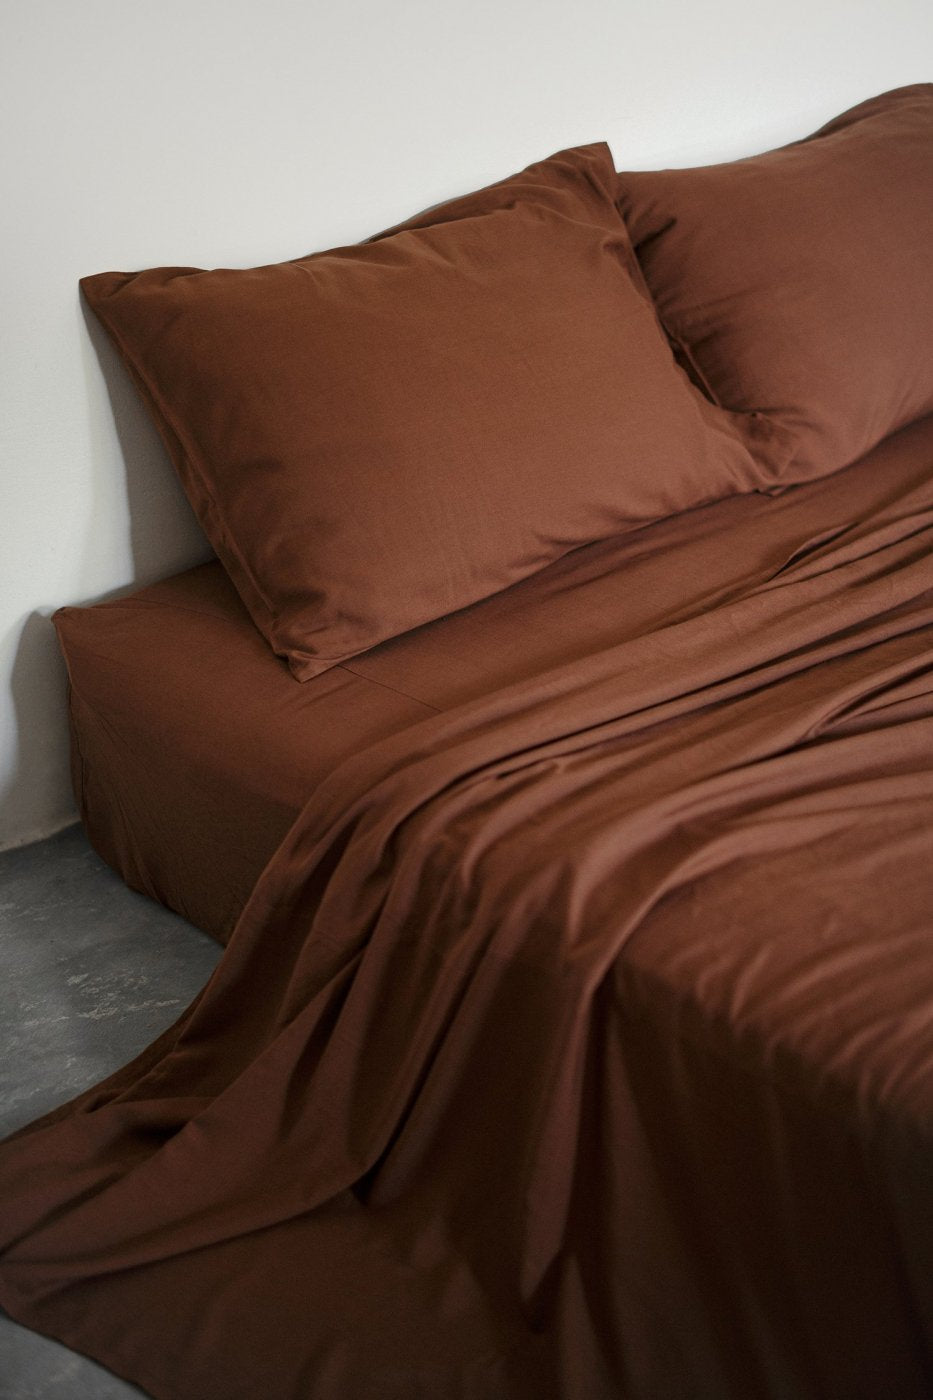 SUKU HOME "FITTED SHEET/CHOC"